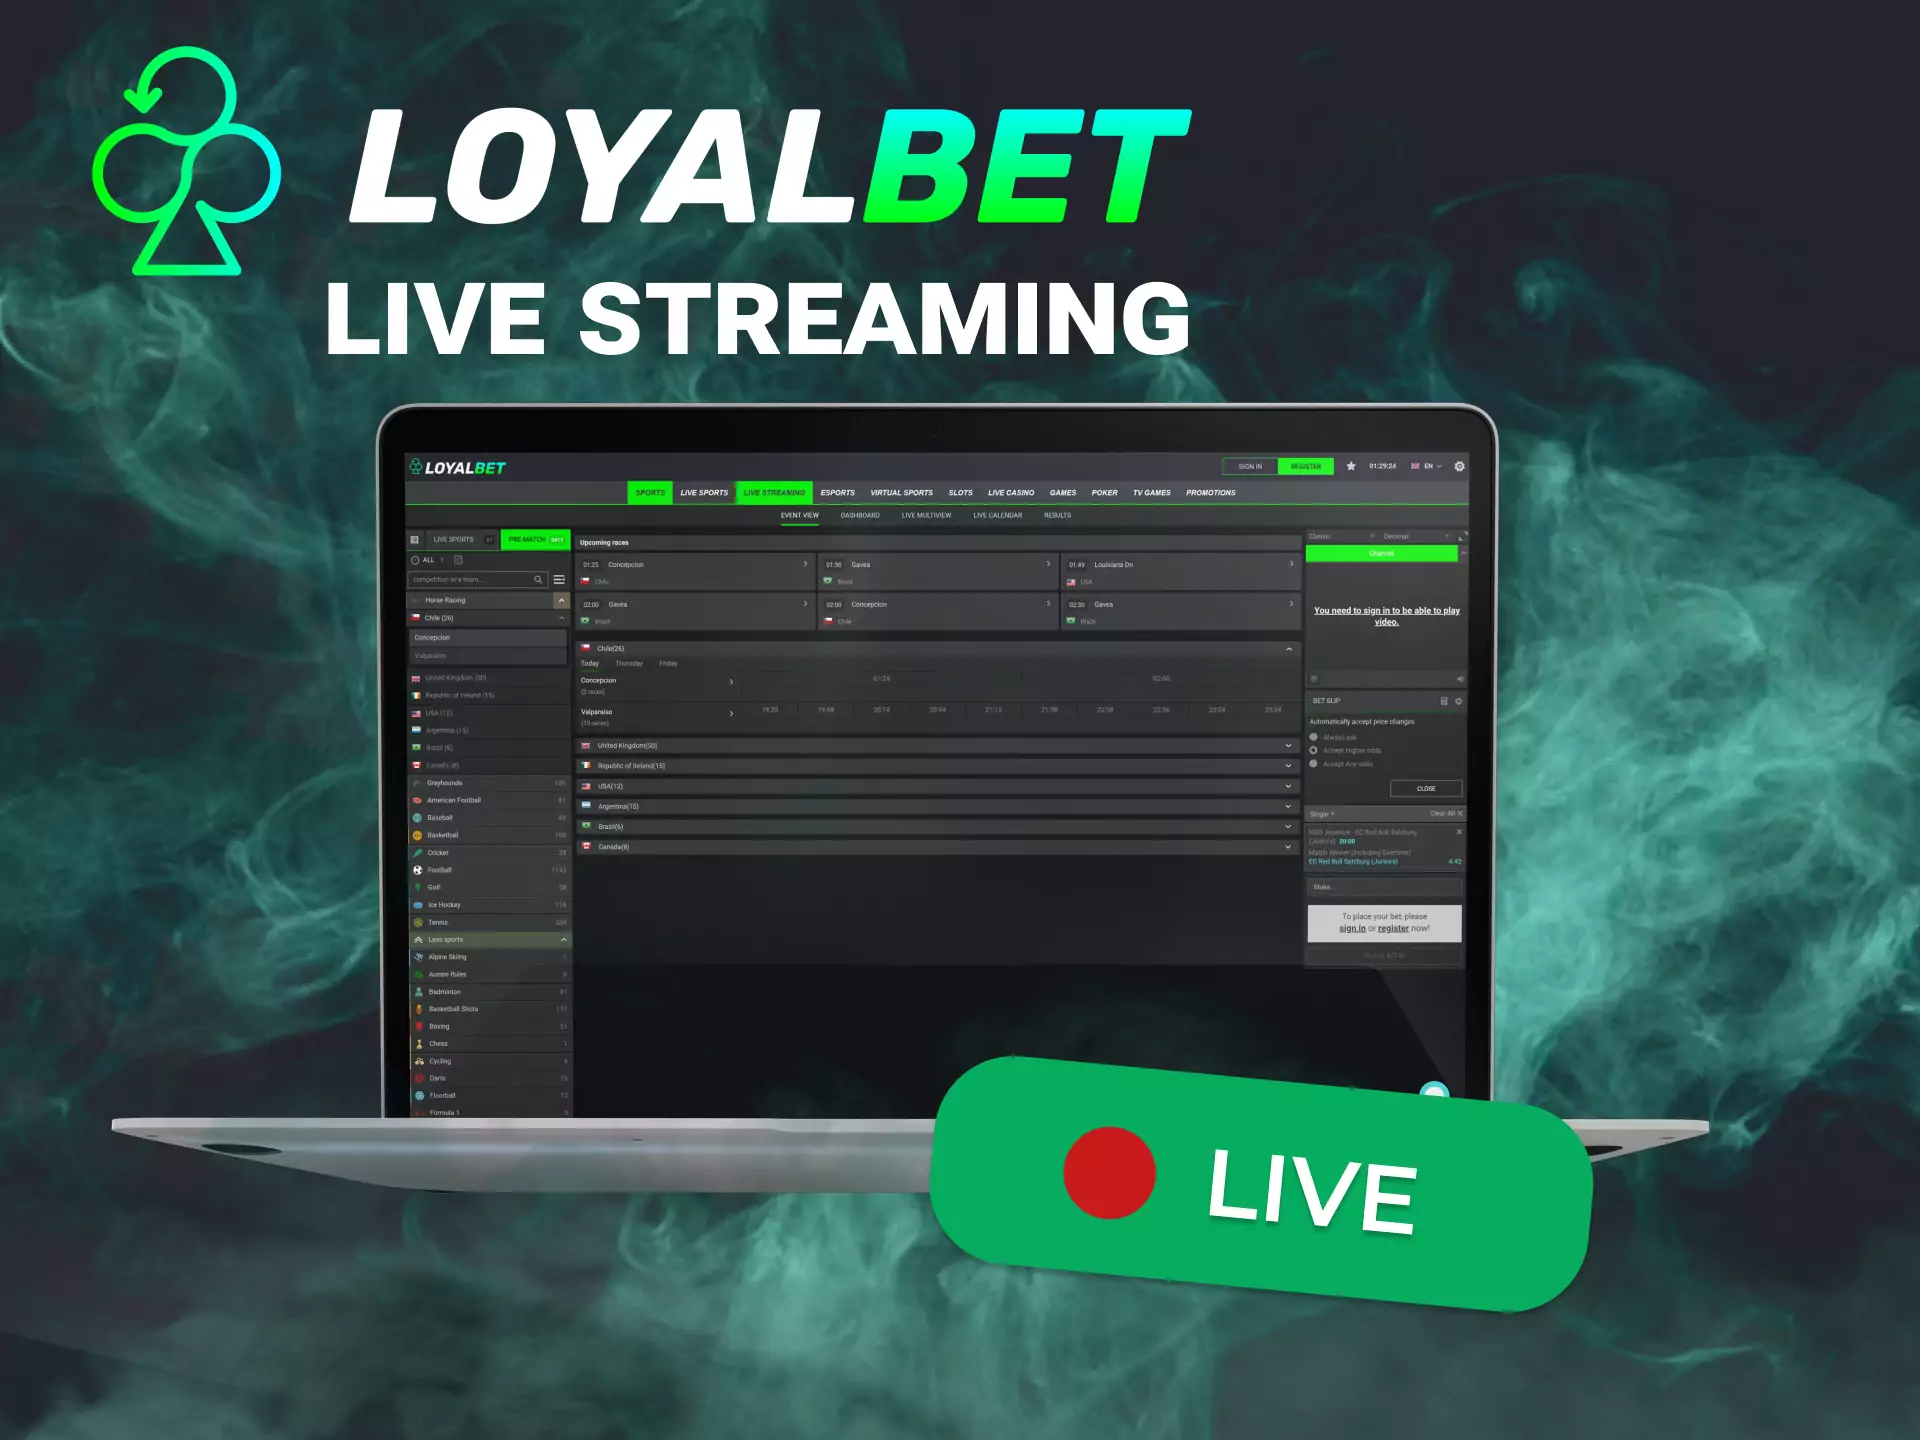 Follow the live matches right on the Loyalbet website.